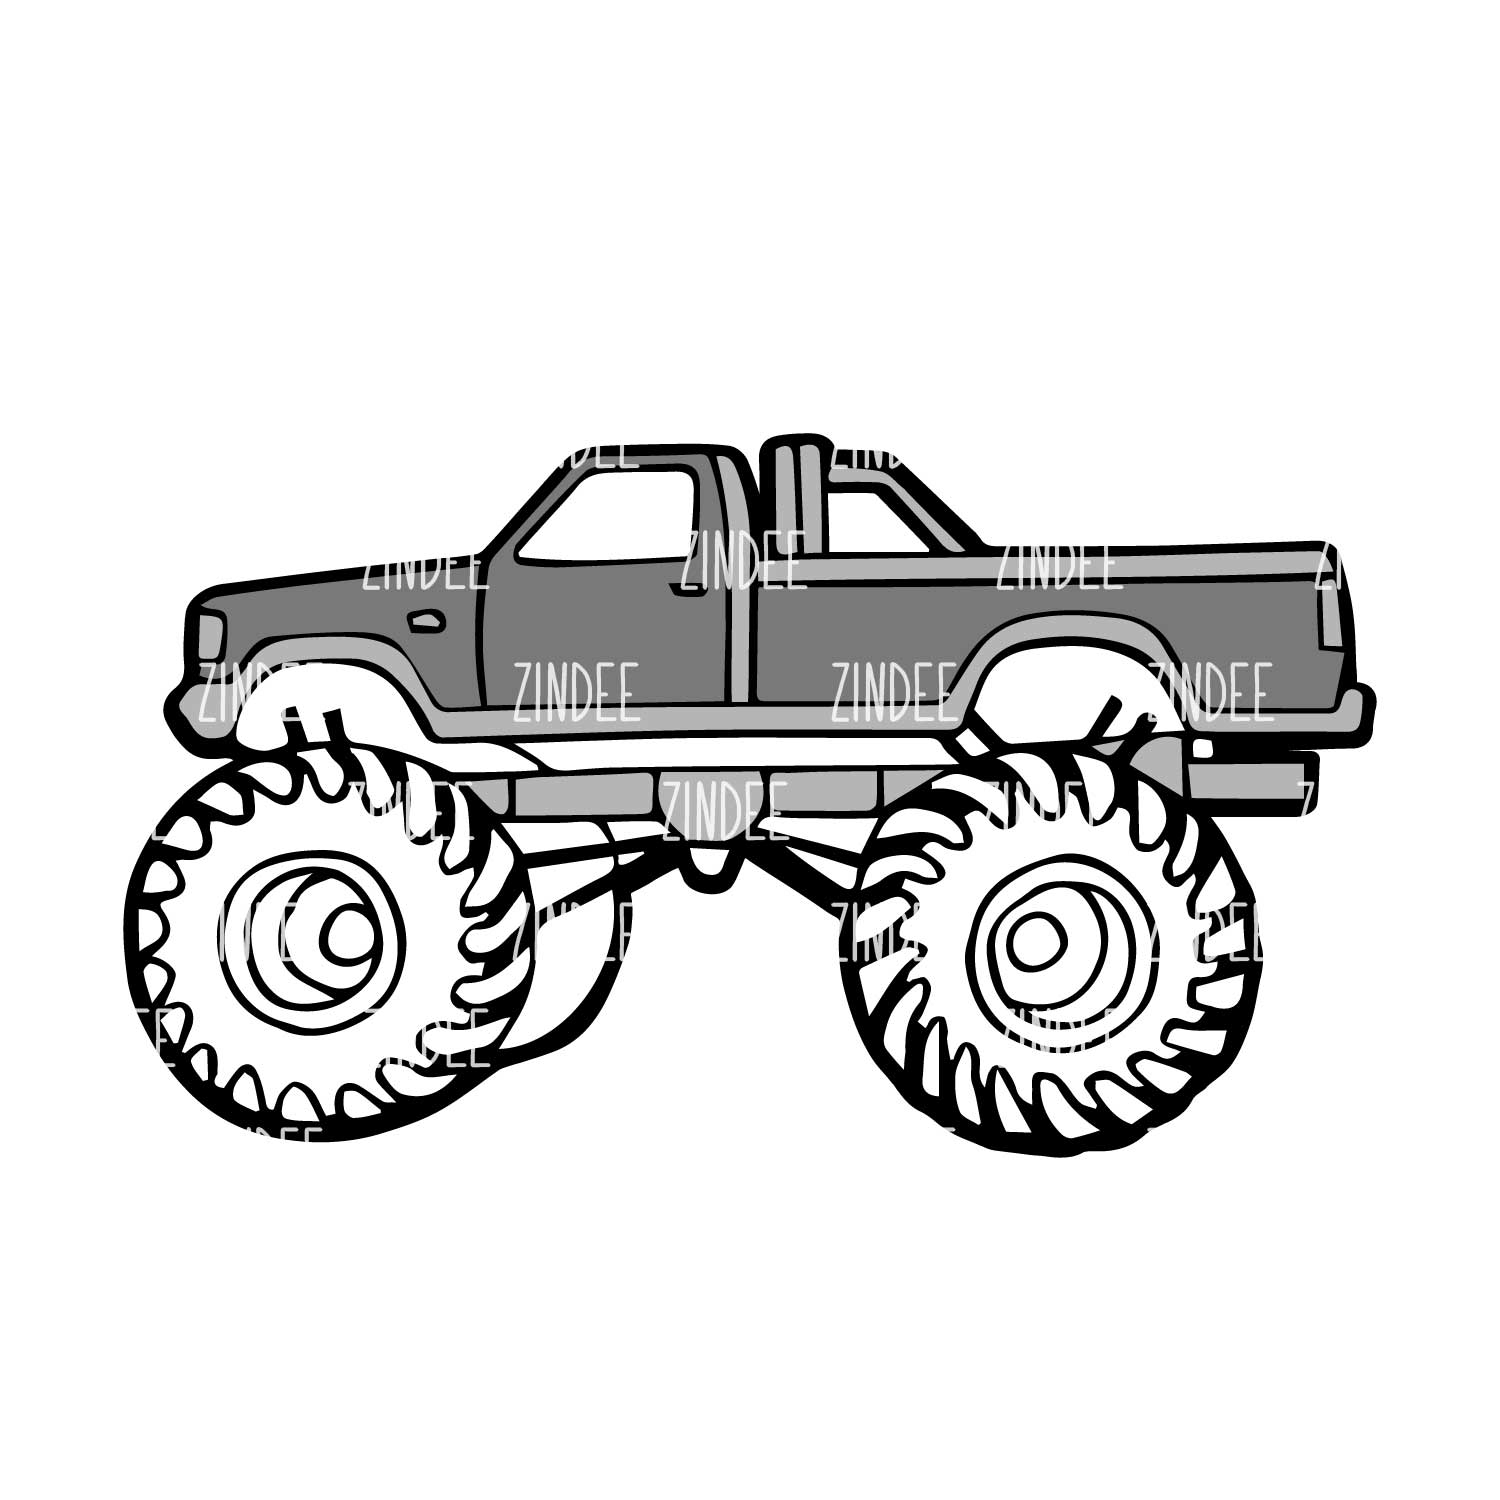 Lifted truck all sizes â